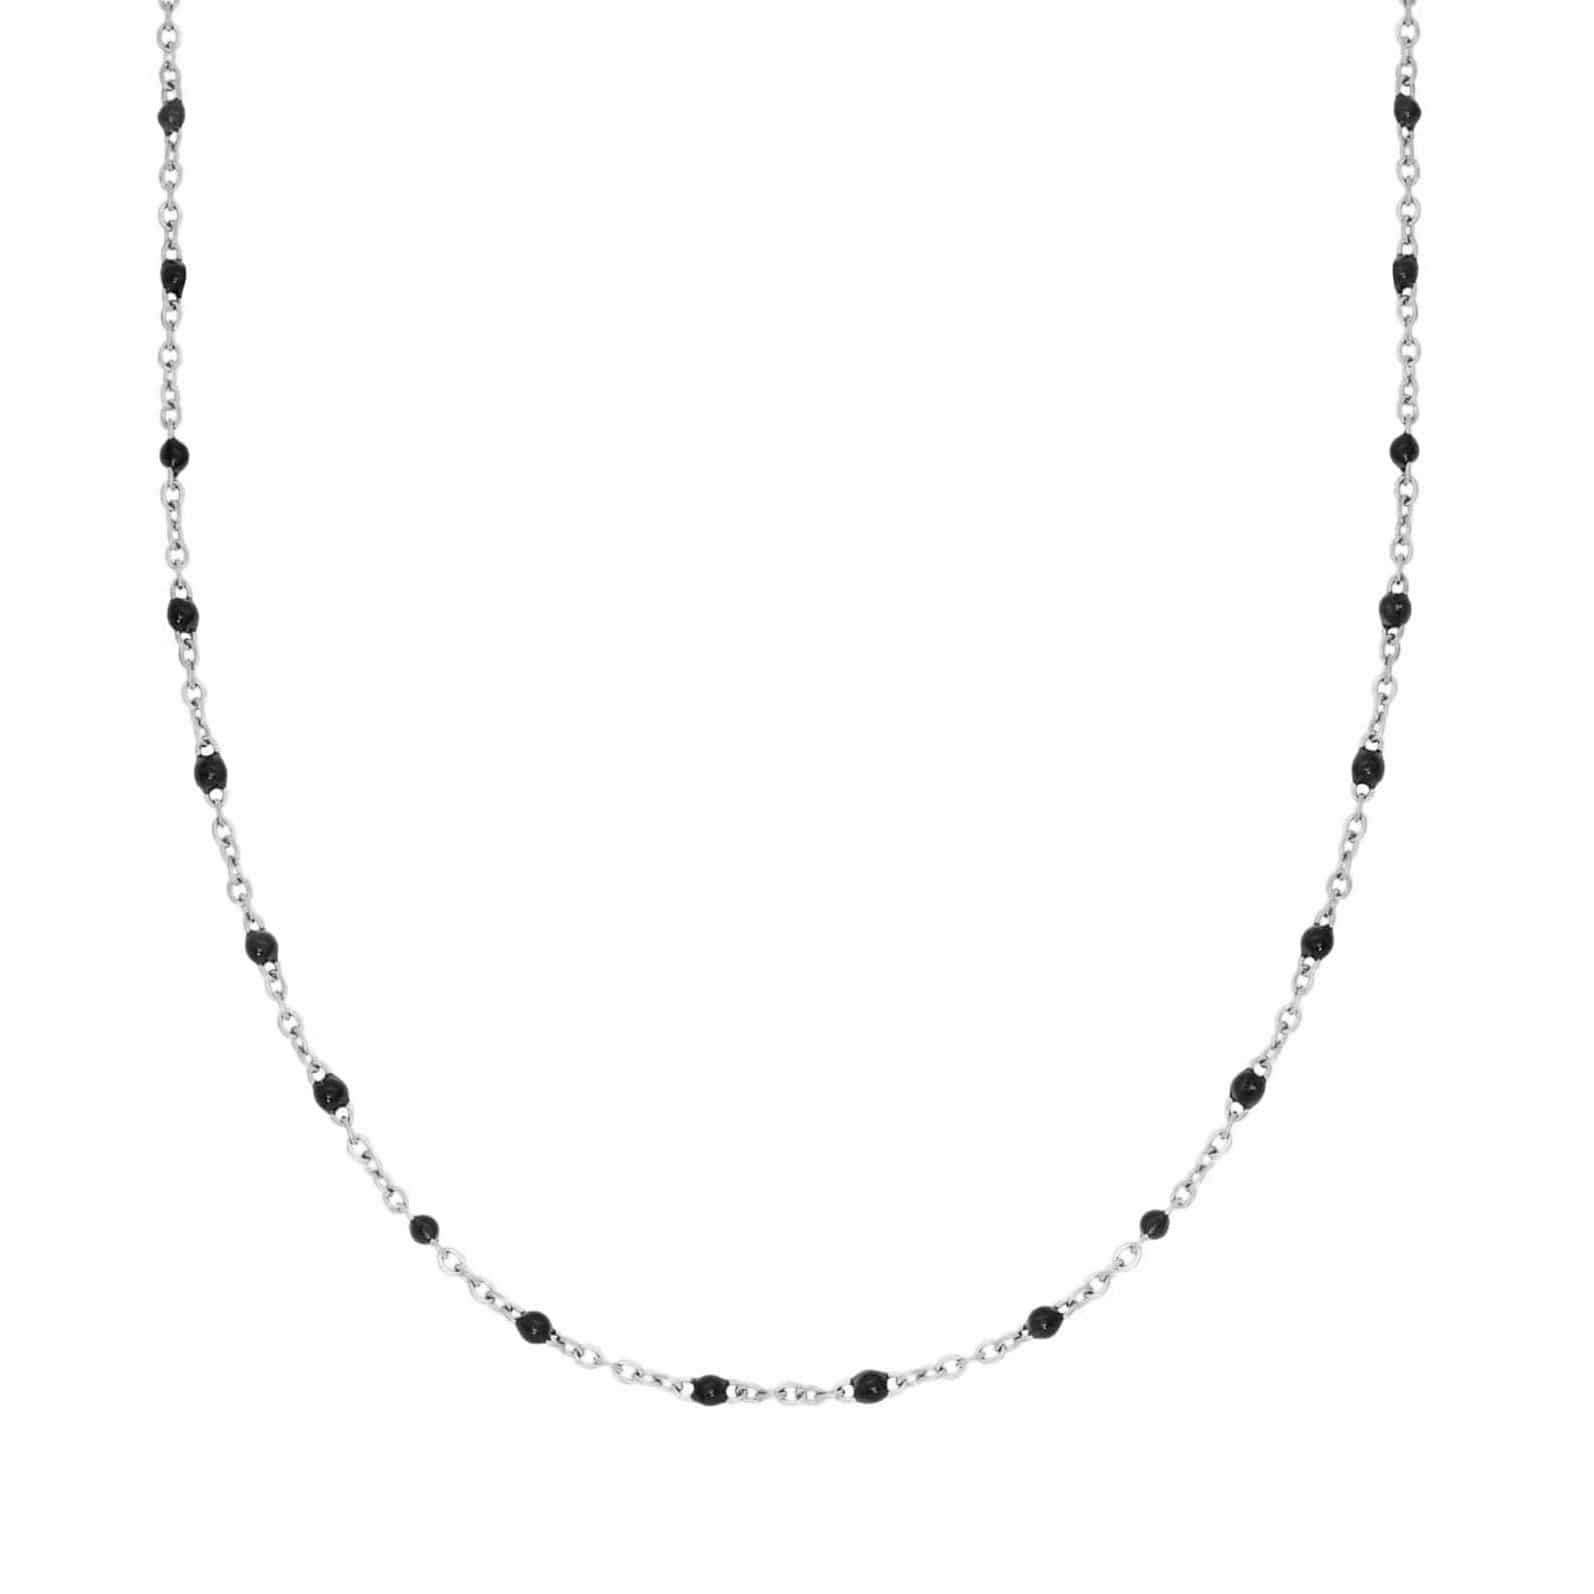 BohoMoon Stainless Steel Hendrix Beaded Necklace Silver